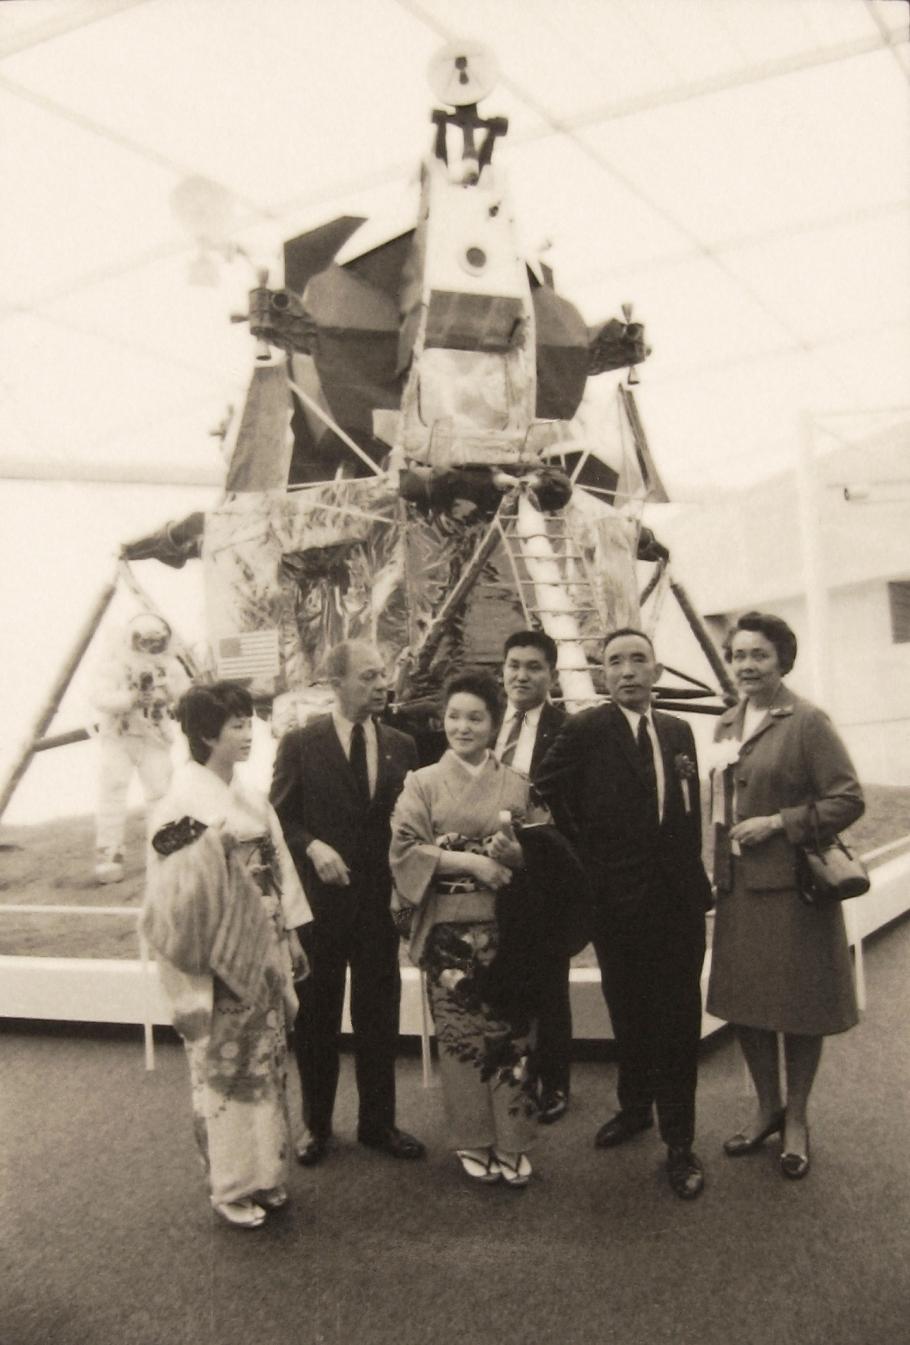 Black and white photo of dignitaries posing in front of the Lunar Module. 